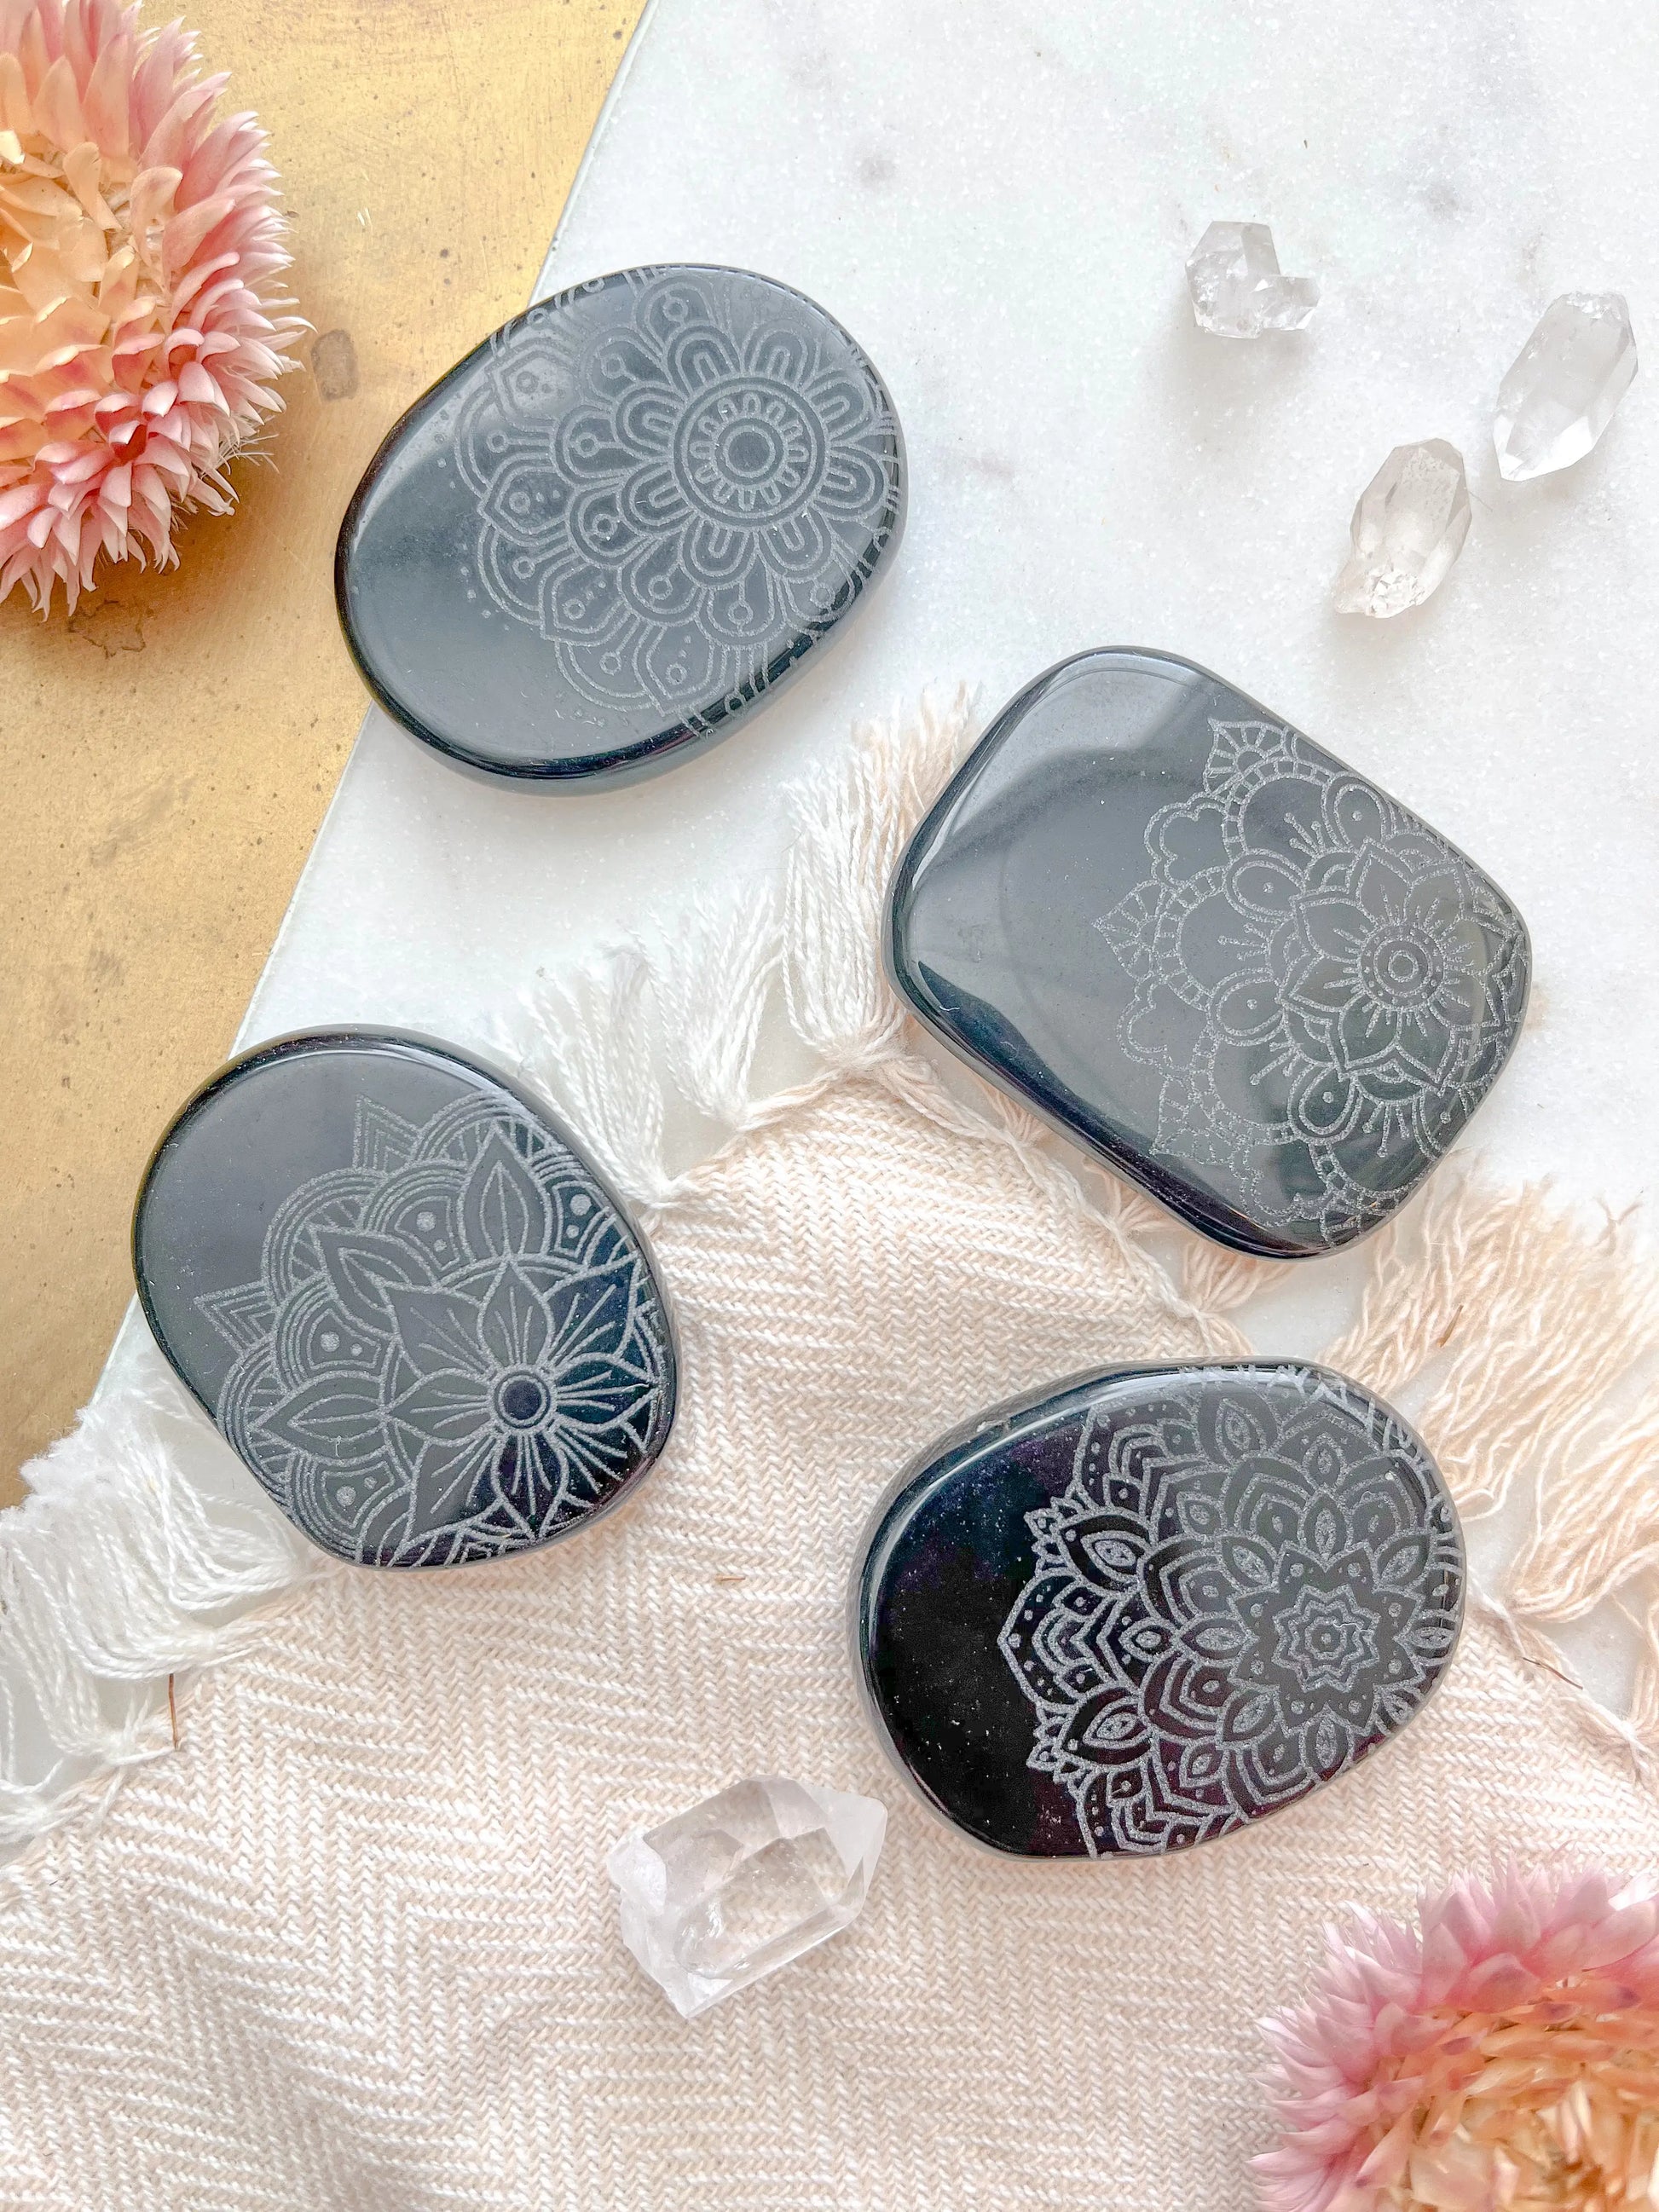 Etched Obsidian Smooth Pocket Stone - Assorted Mandalas fractalista designs faire